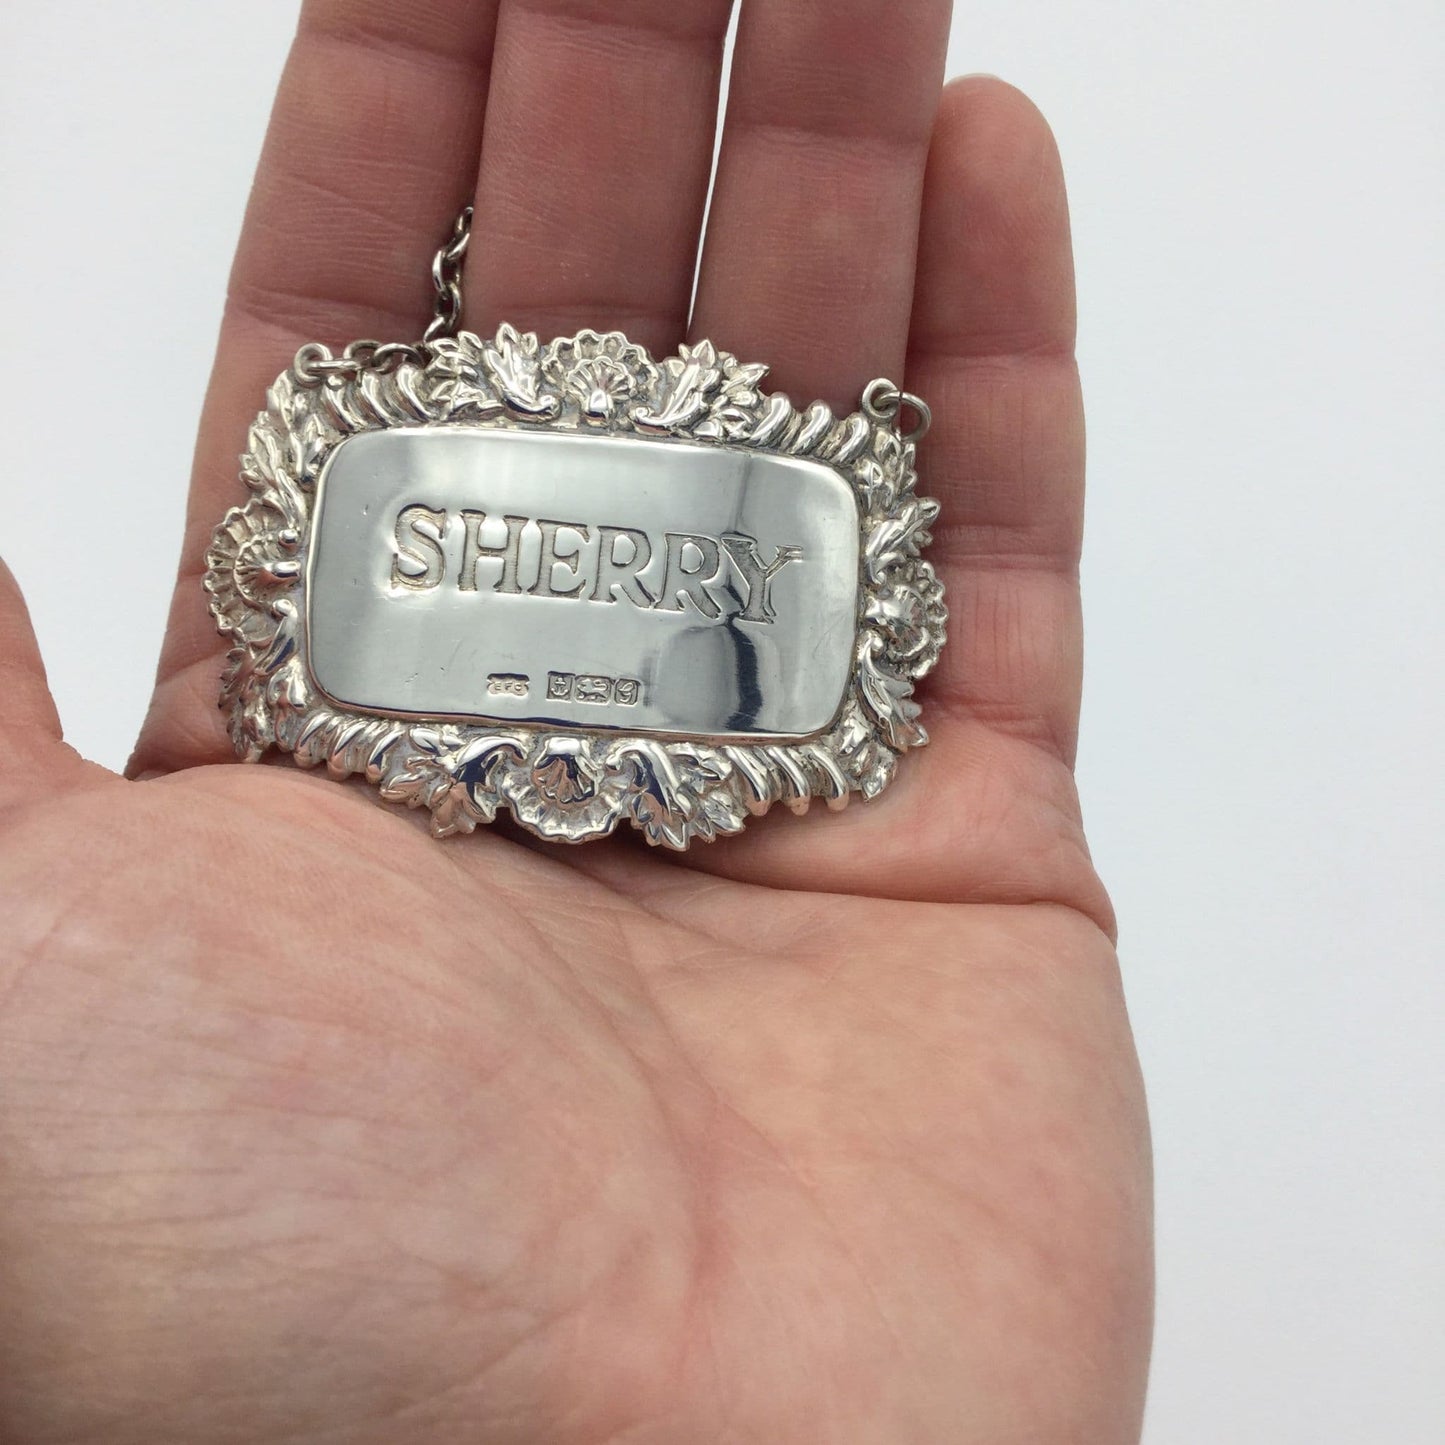 1981  Sterling Silver Sherry Decanter Label